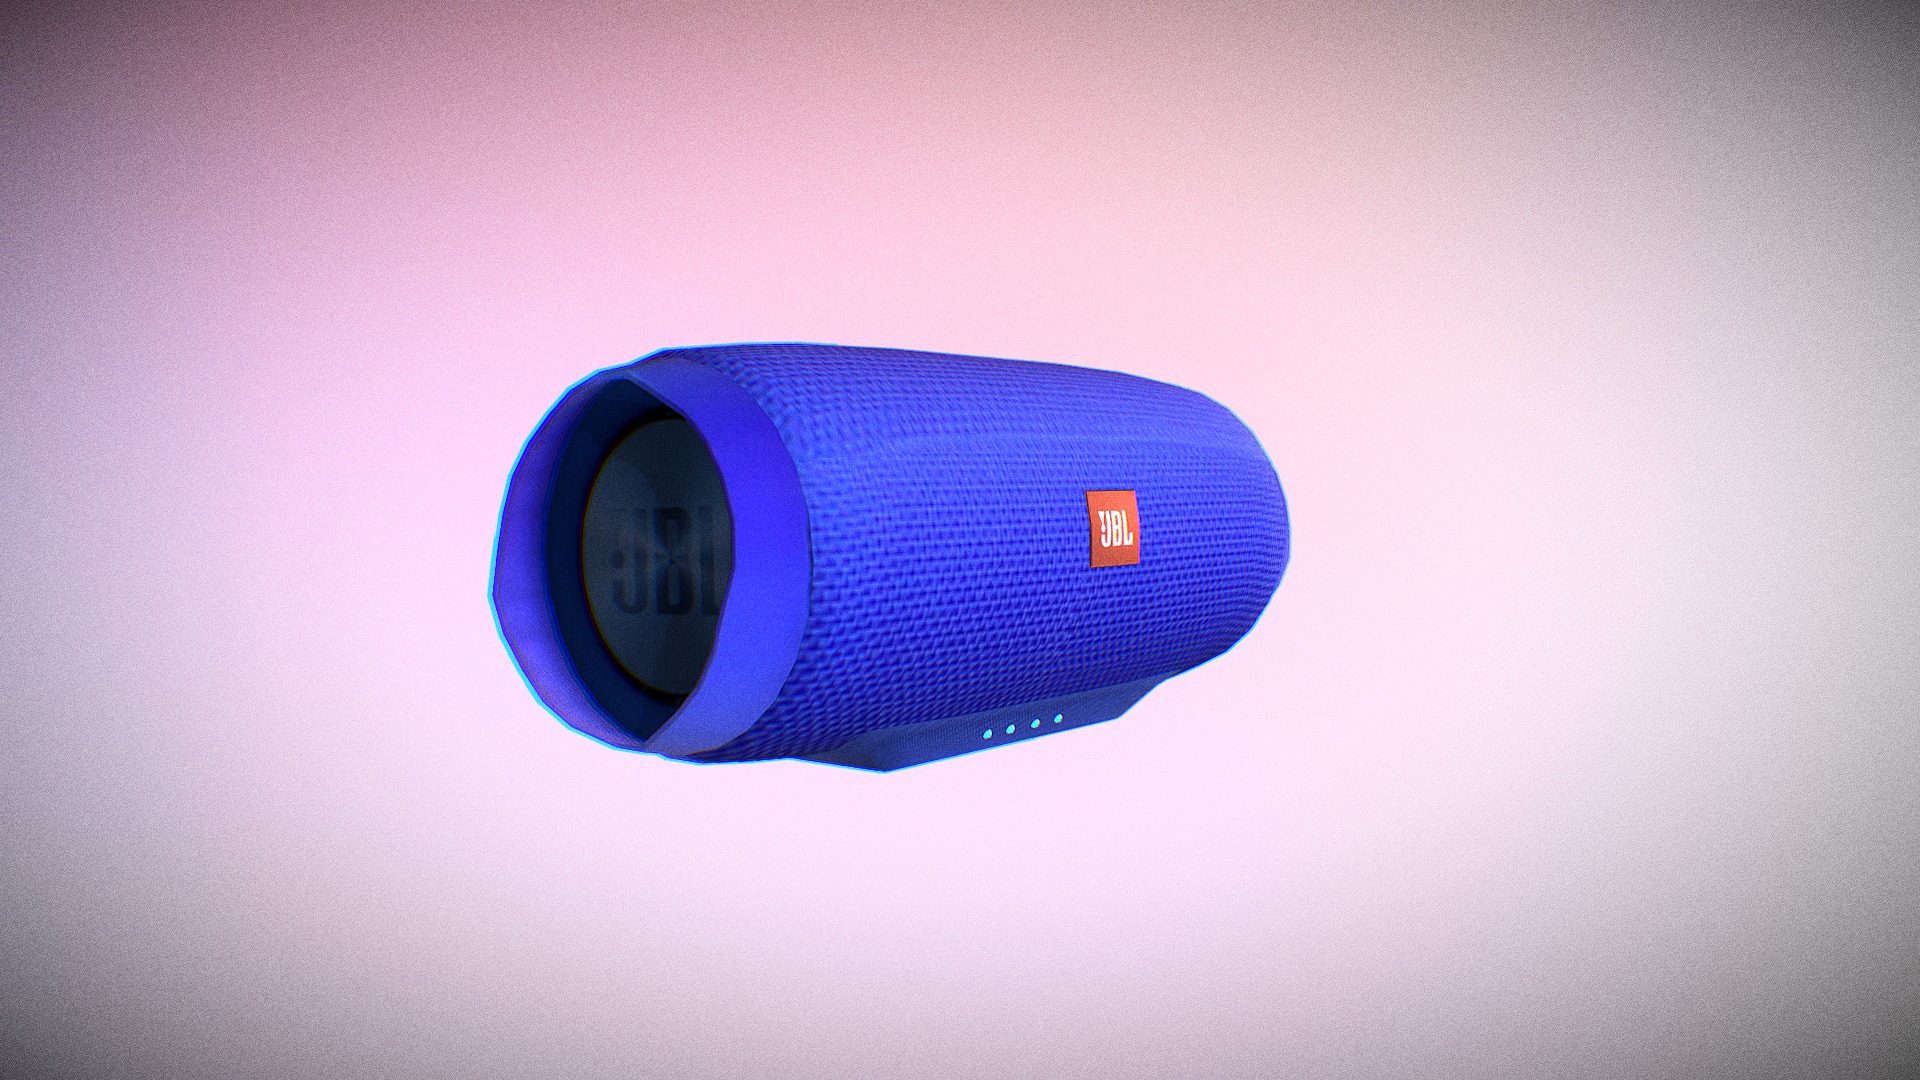 3D model JBL - This is a 3D model of the JBL. The 3D model is about a blue rectangle with a black circle on it.